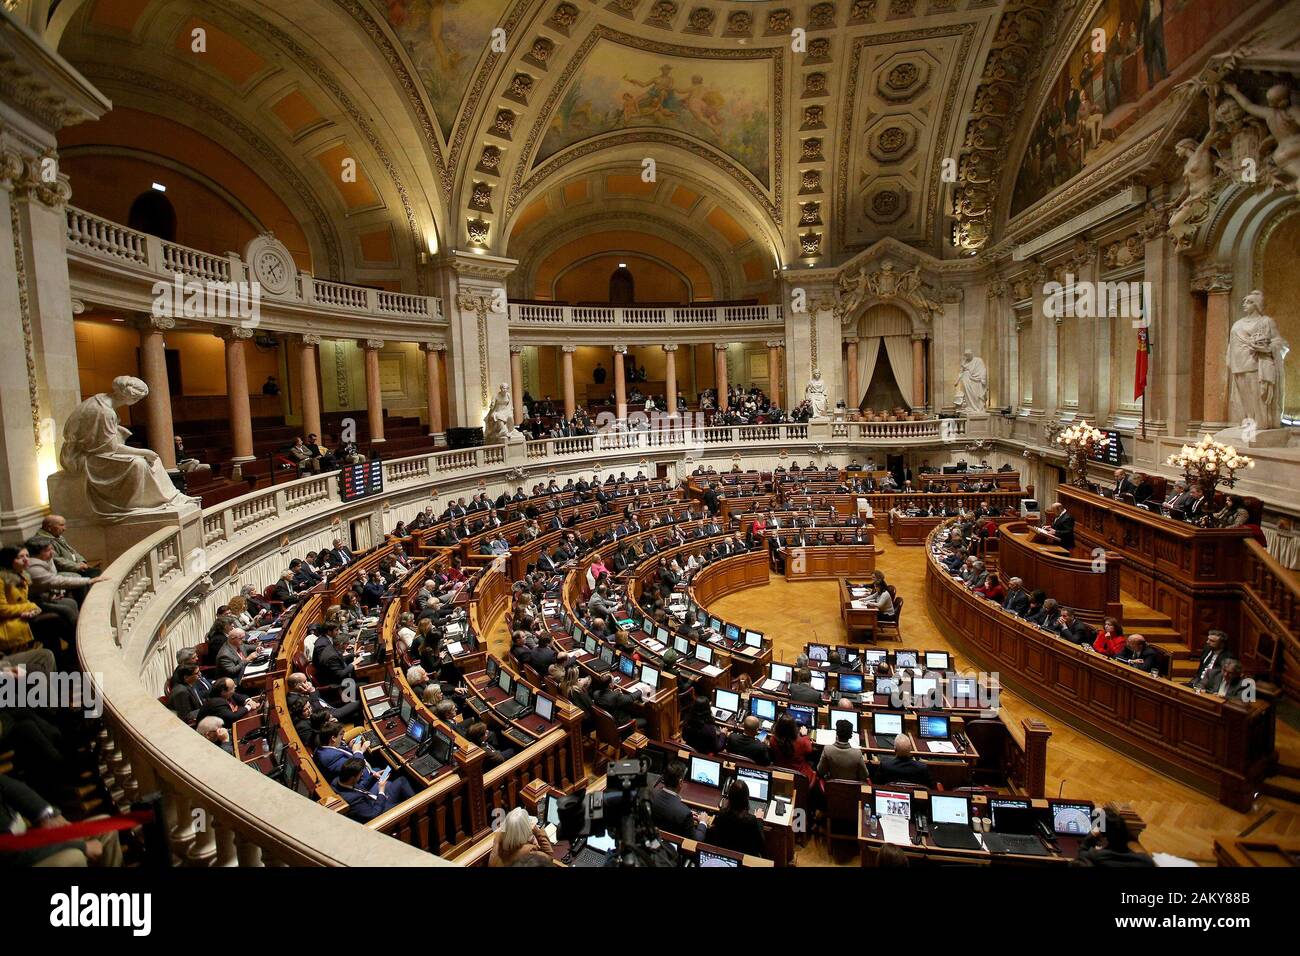 Lisbon. 10th Jan, 2020. Photo taken on Jan. 10, 2020 shows a view of the State Budget 2020 final debate at the Portuguese Parliament in Lisbon, Portugal. Portugal's State Budget 2020 final debate was held here on Friday. Credit: Pedro Fiuza/Xinhua/Alamy Live News Stock Photo